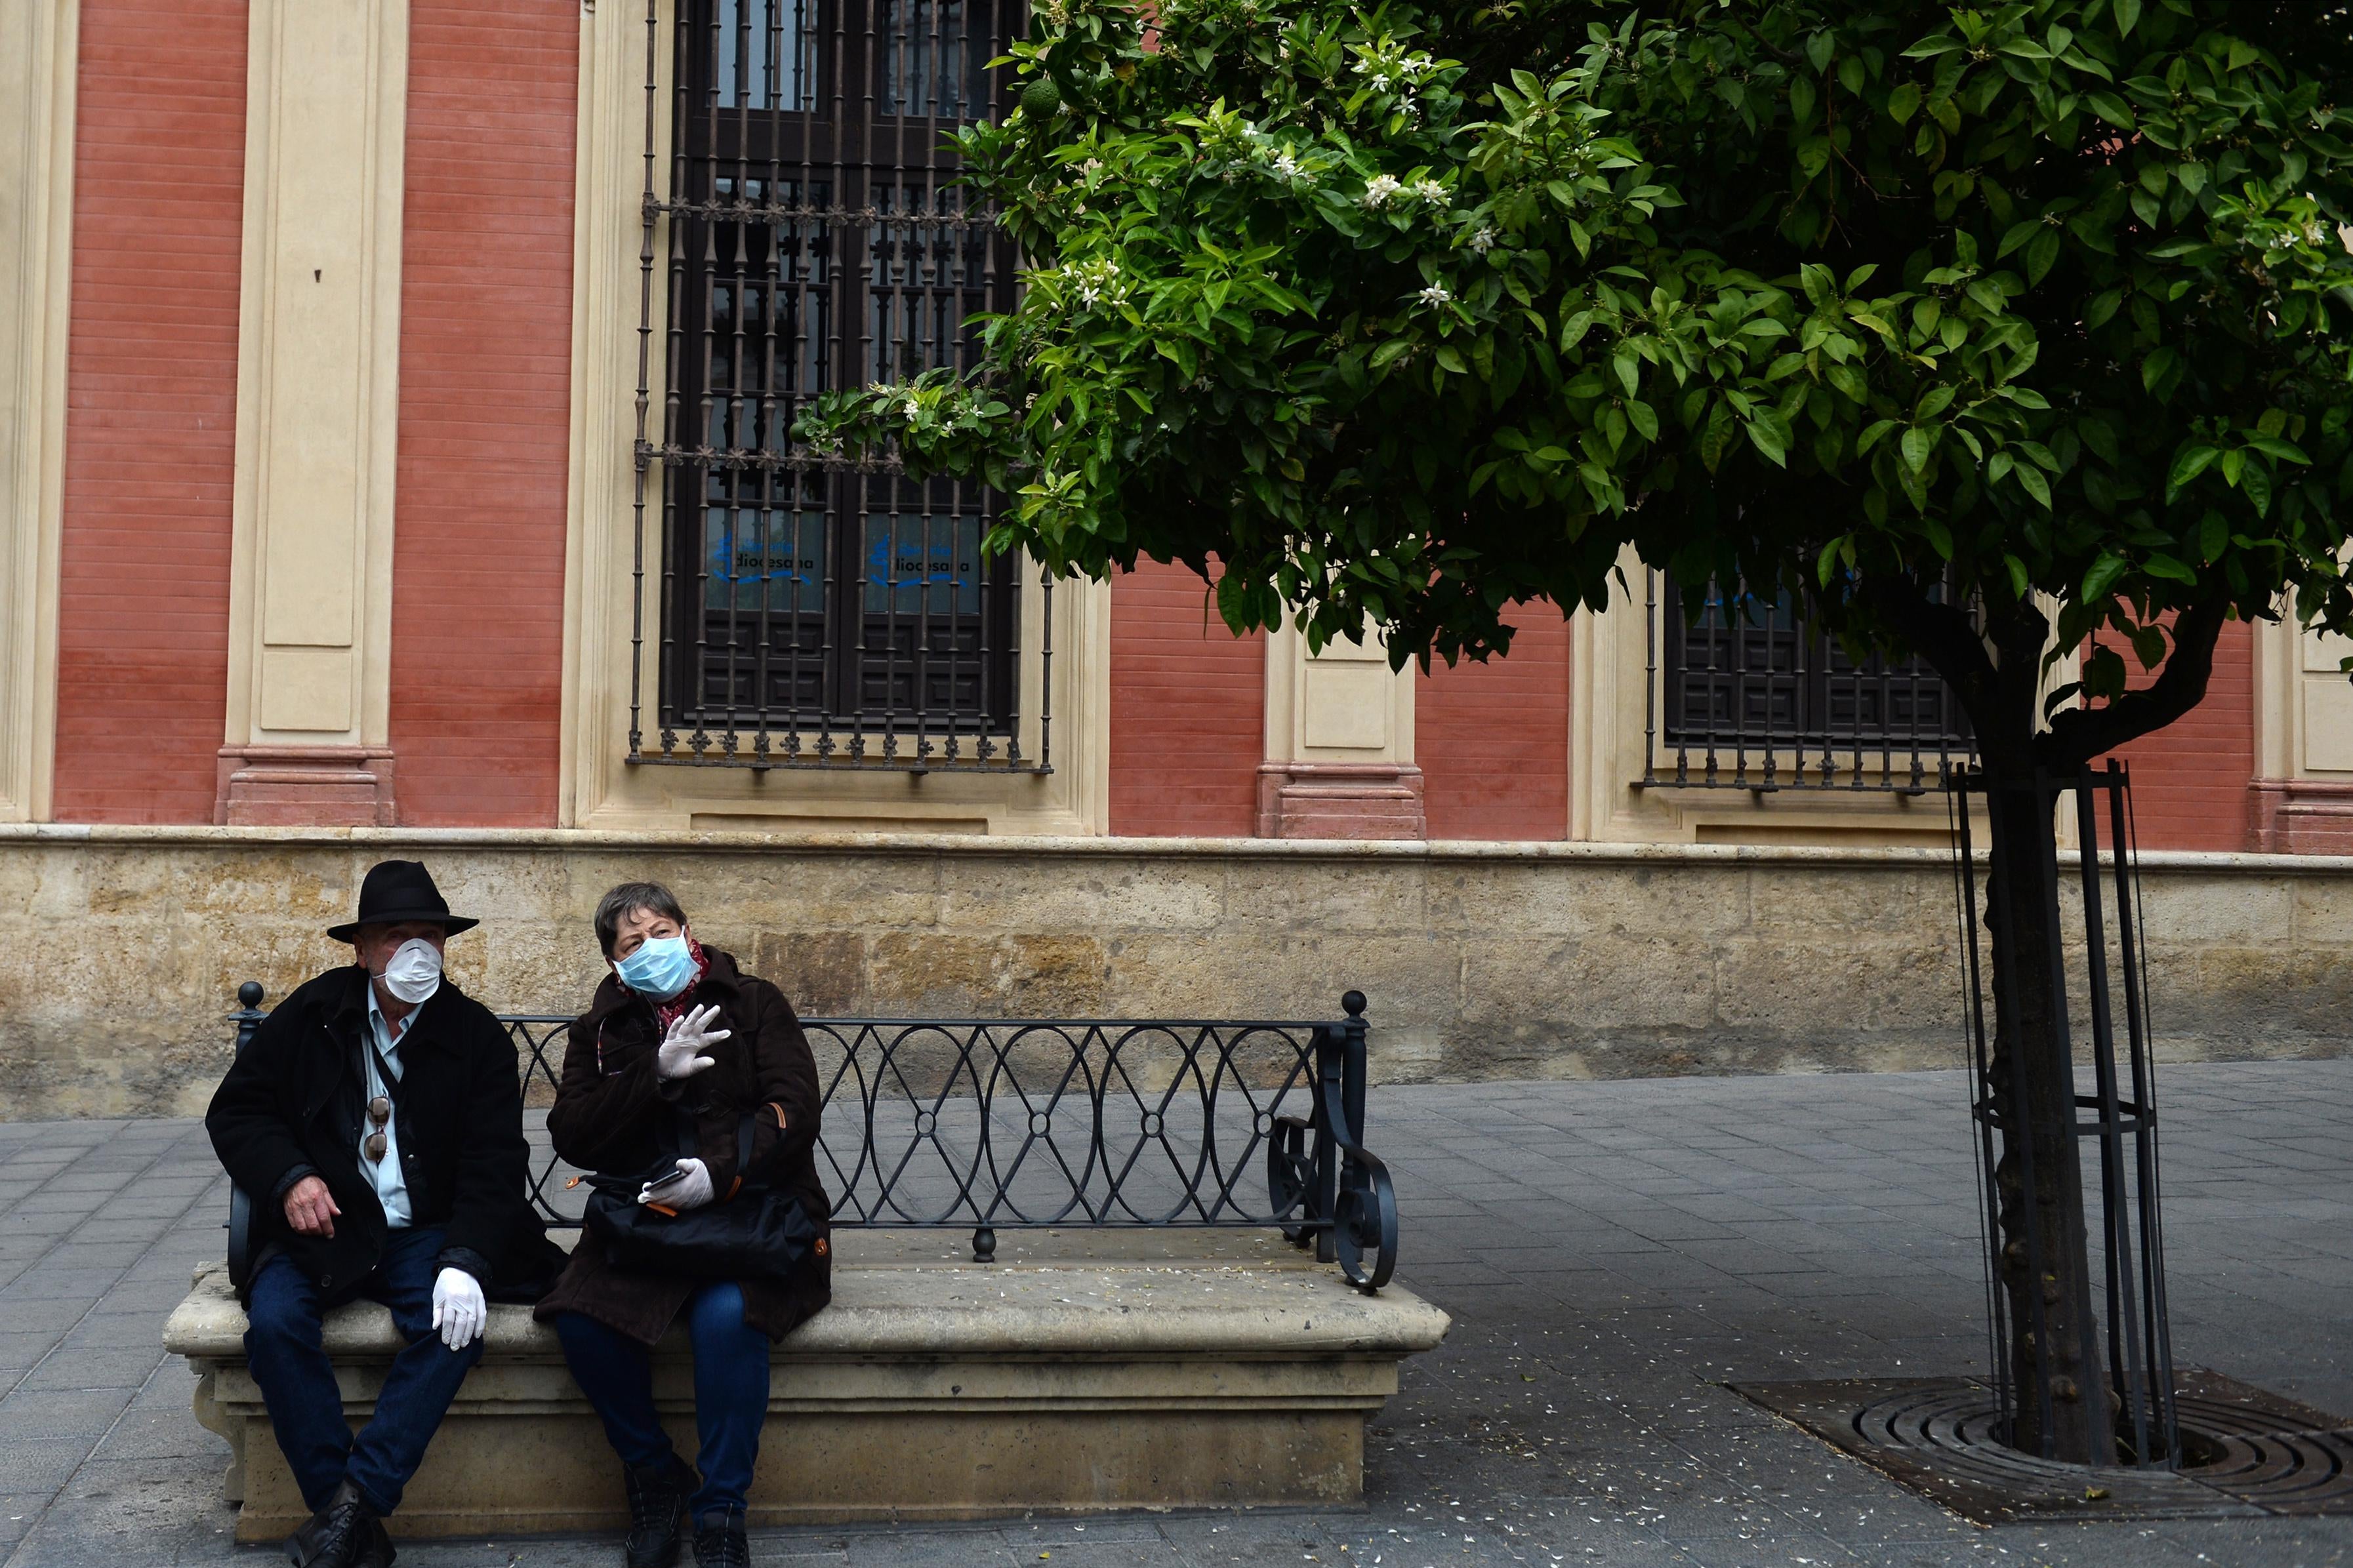 A couple, wearing protective masks and gloves, sit on a bench outside.